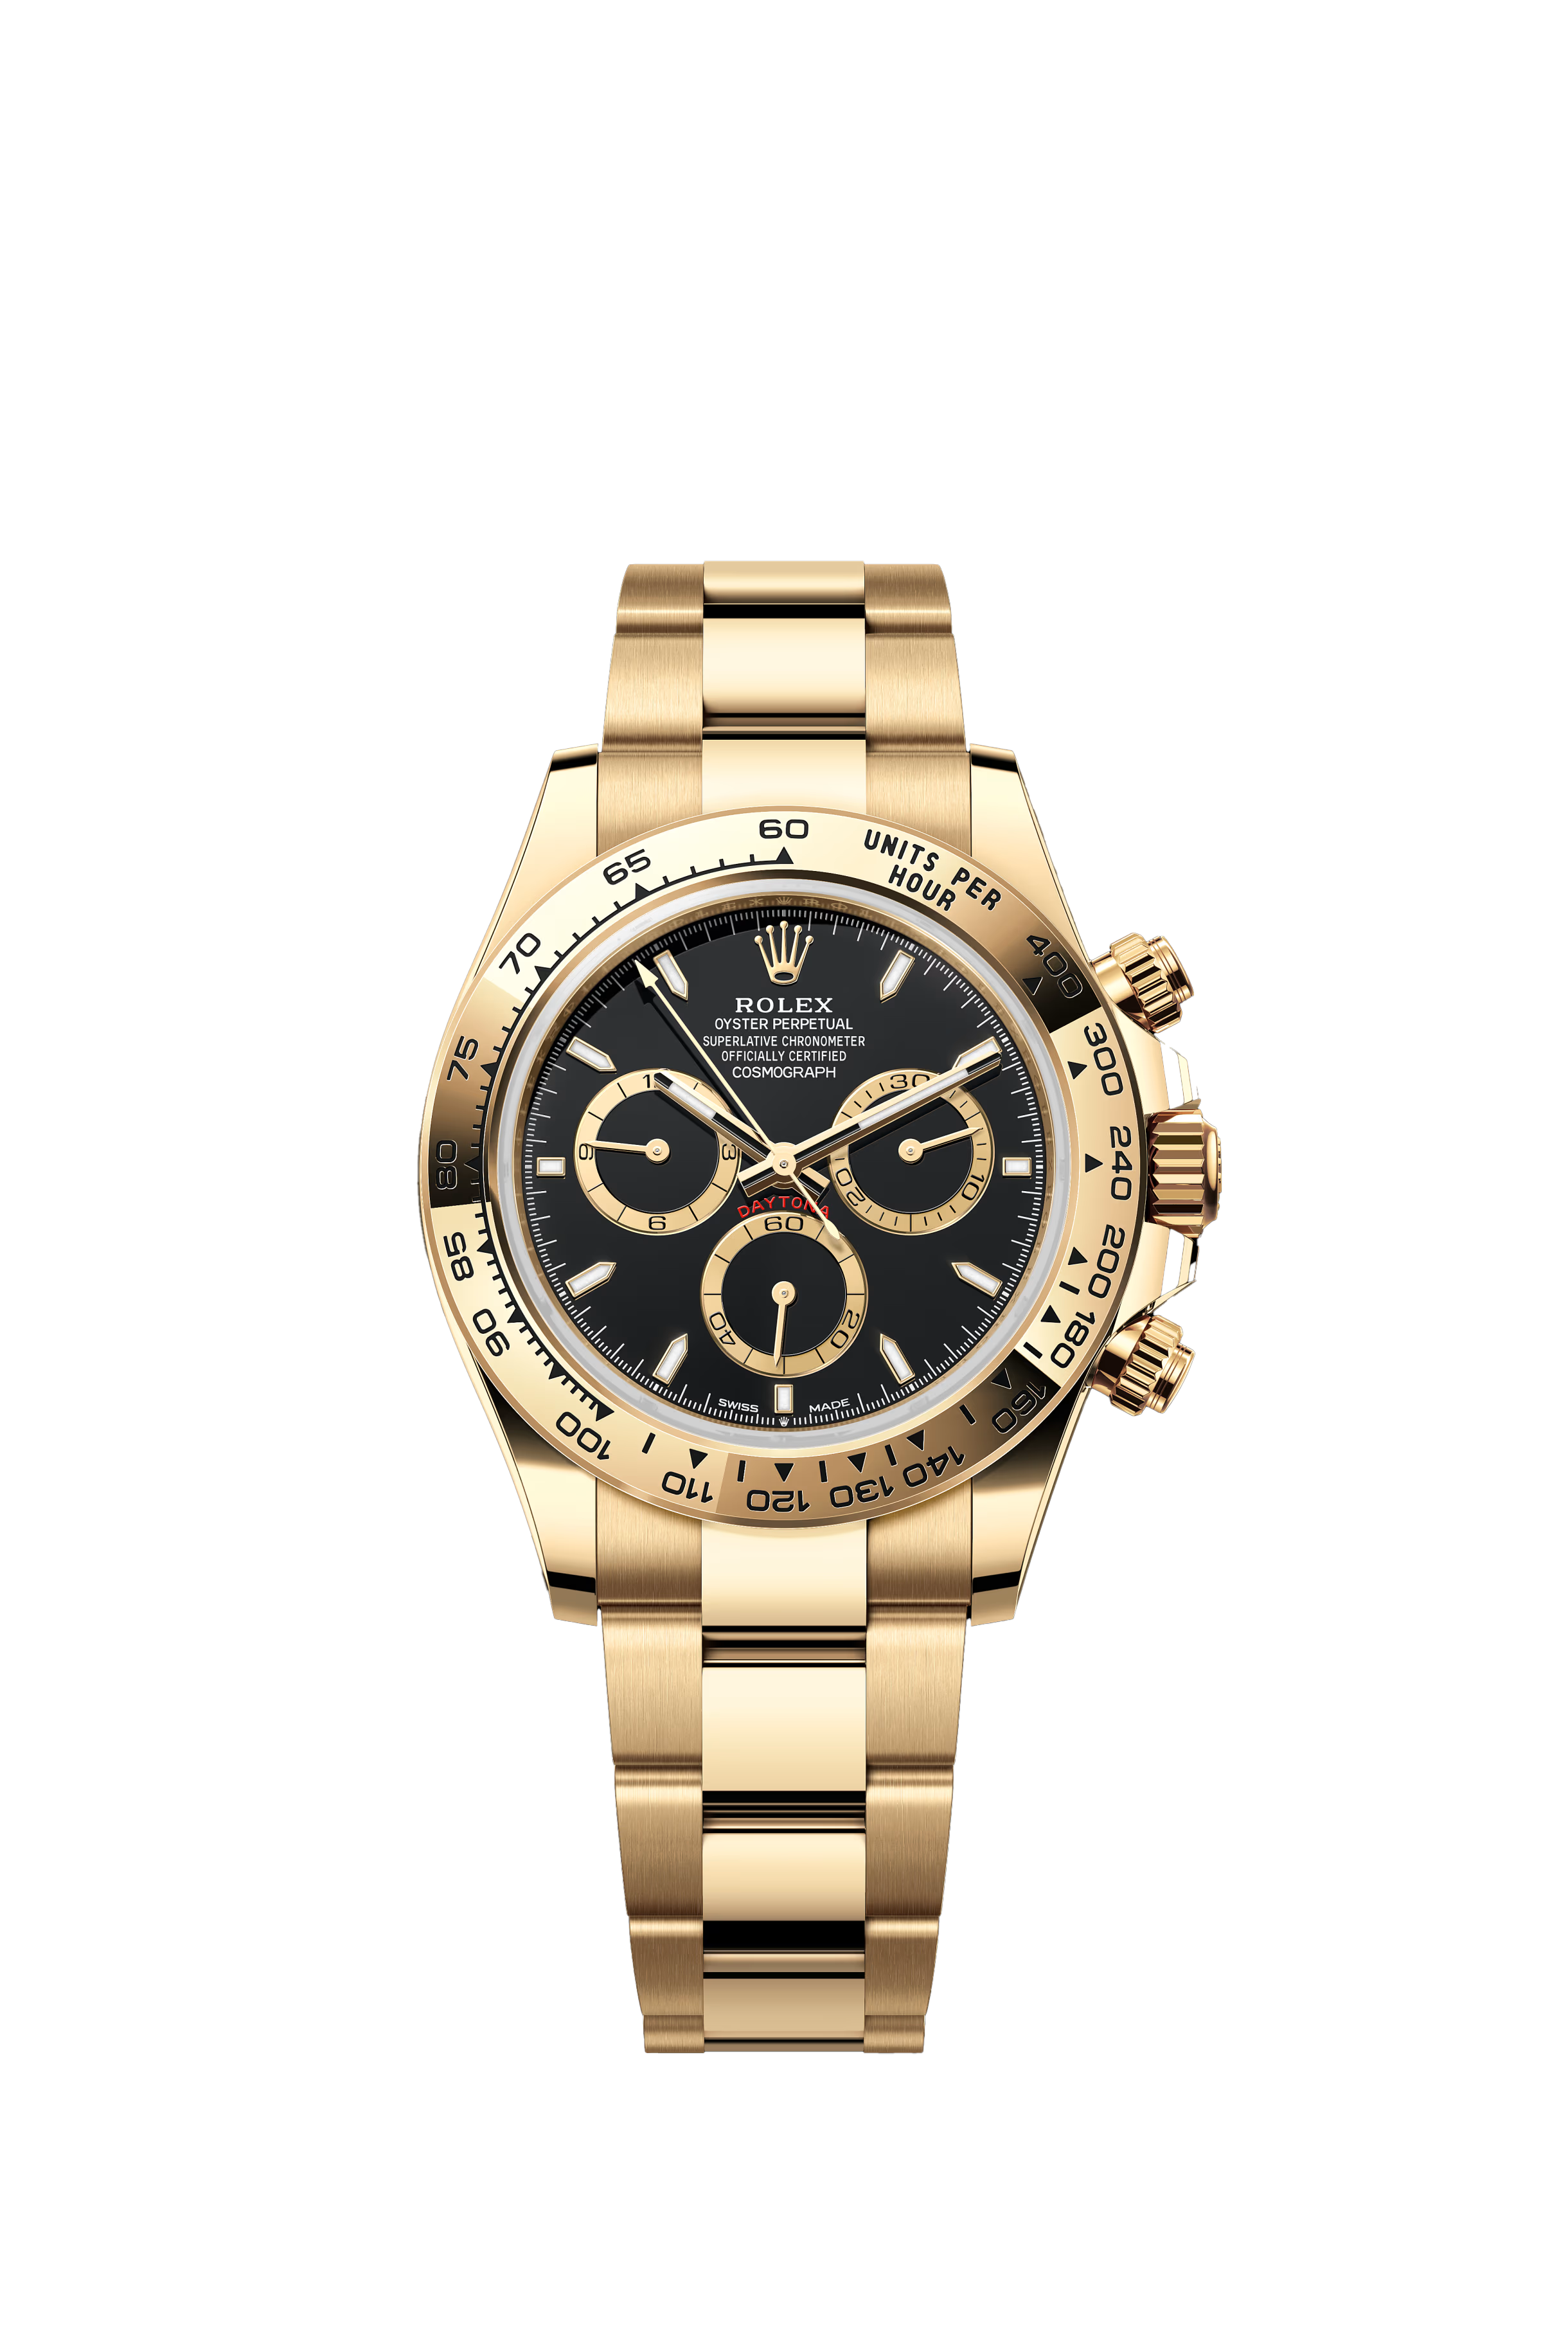 Rolex Cosmograph Daytona Oyster, 40 mm, yellow gold Reference 126508